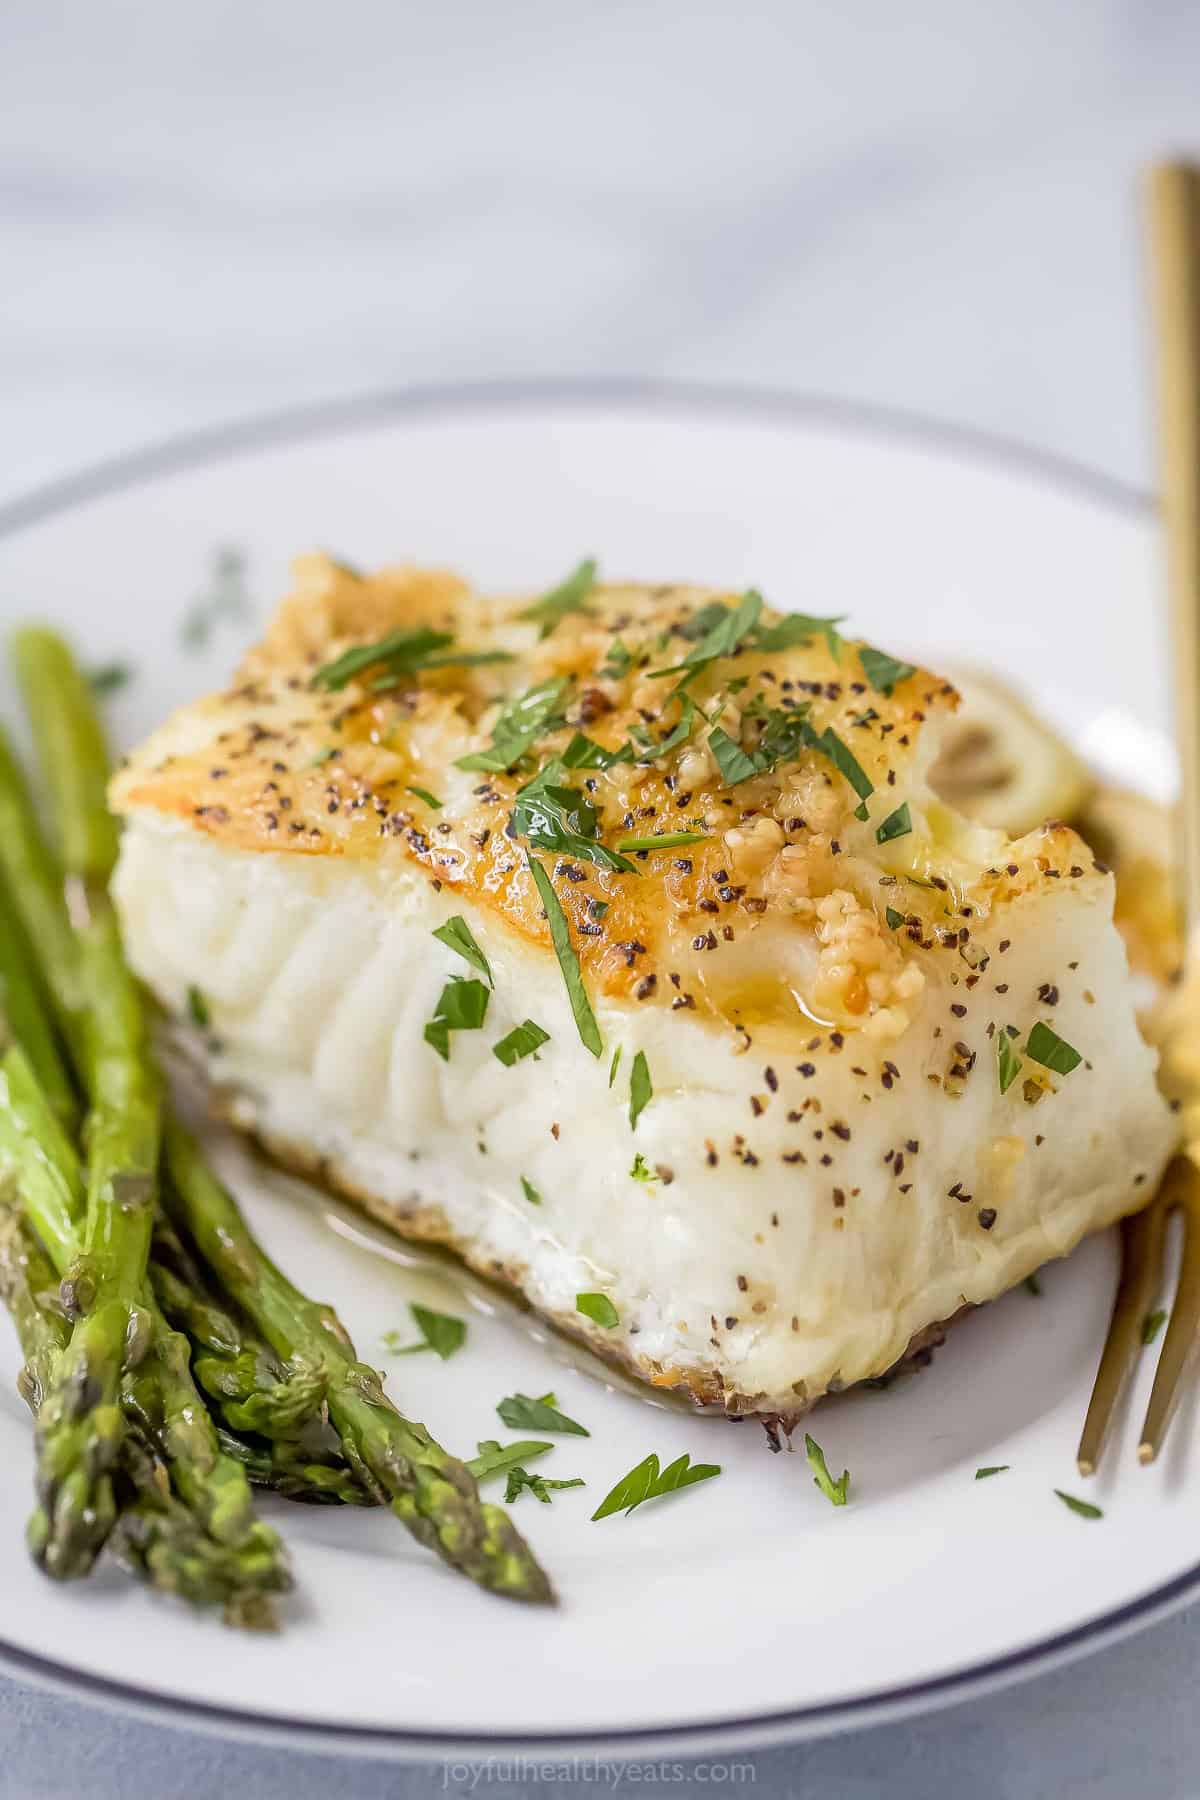 Seared sea bass with asparagus on the side